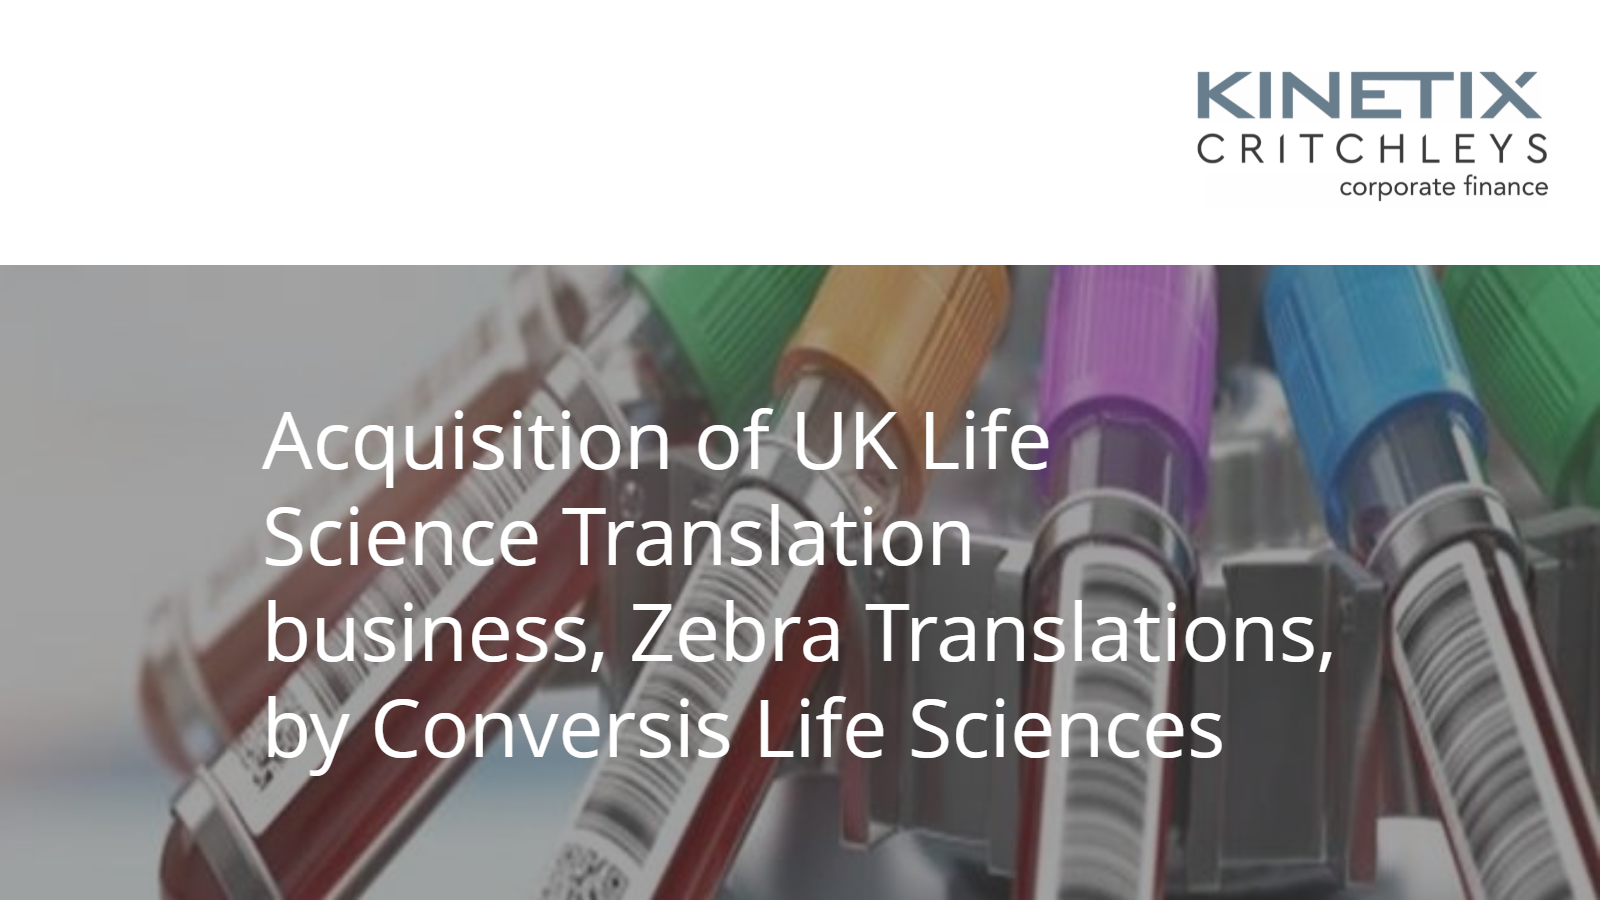 Acquisition of UK Life Science Translation business, Zebra Translations, by Conversis Life Sciences